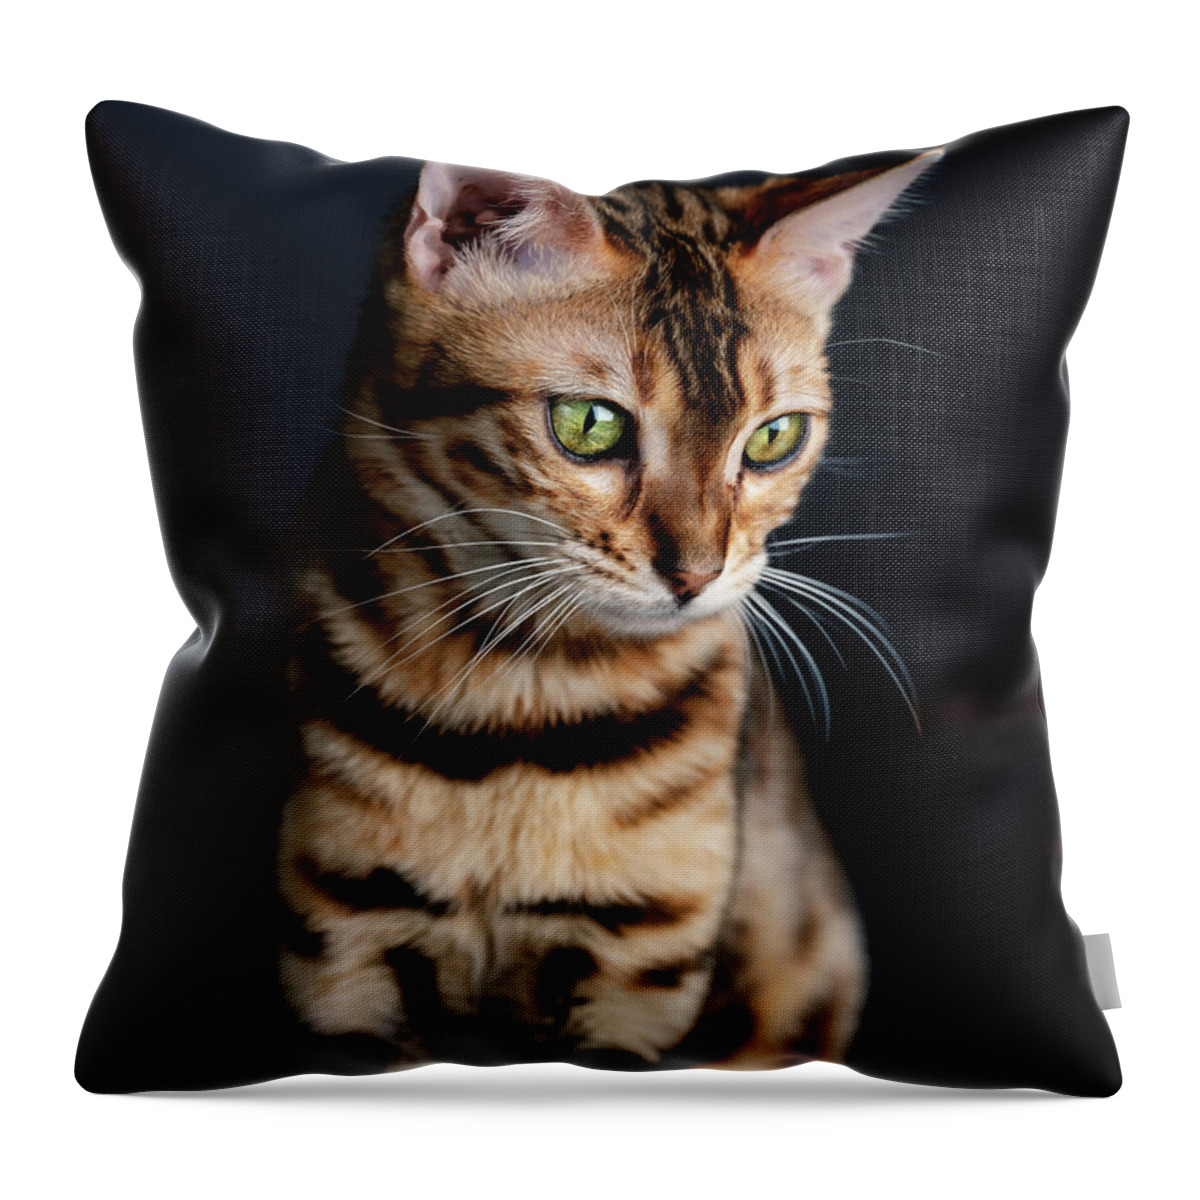 Bengal Throw Pillow featuring the photograph Bengal Cat Portrait #1 by Nailia Schwarz